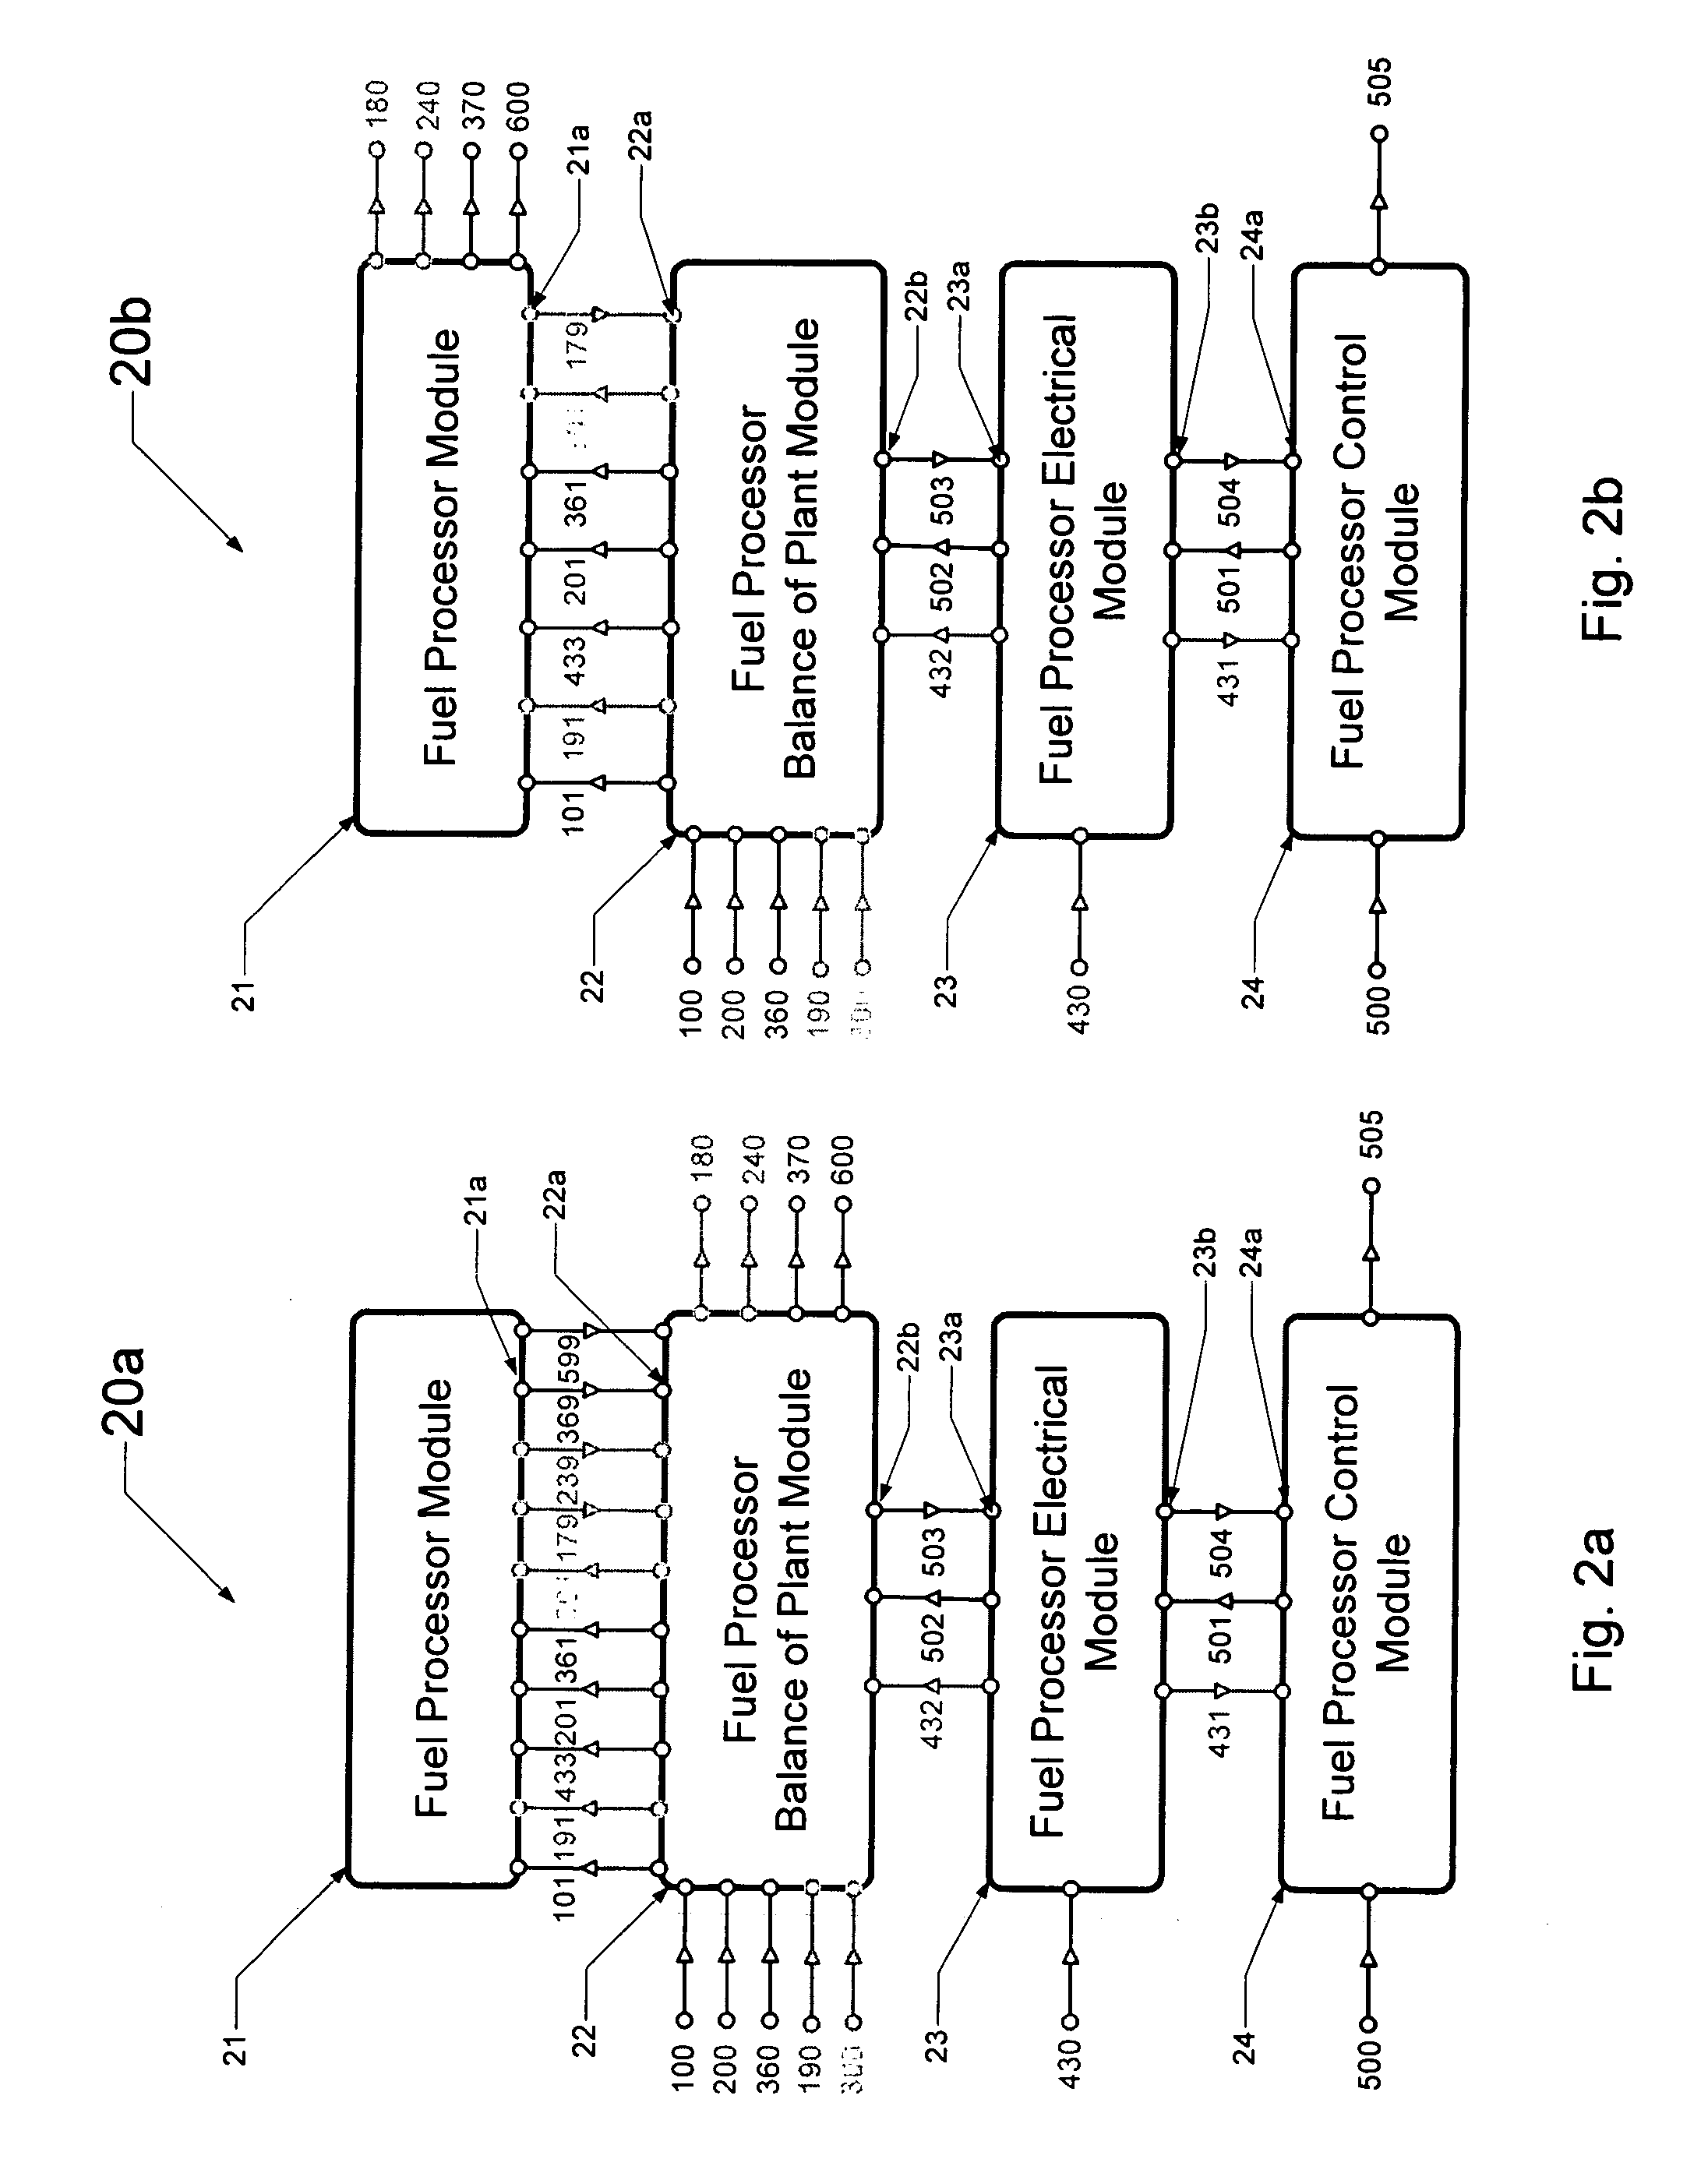 Fuel cell system comprising modular design features